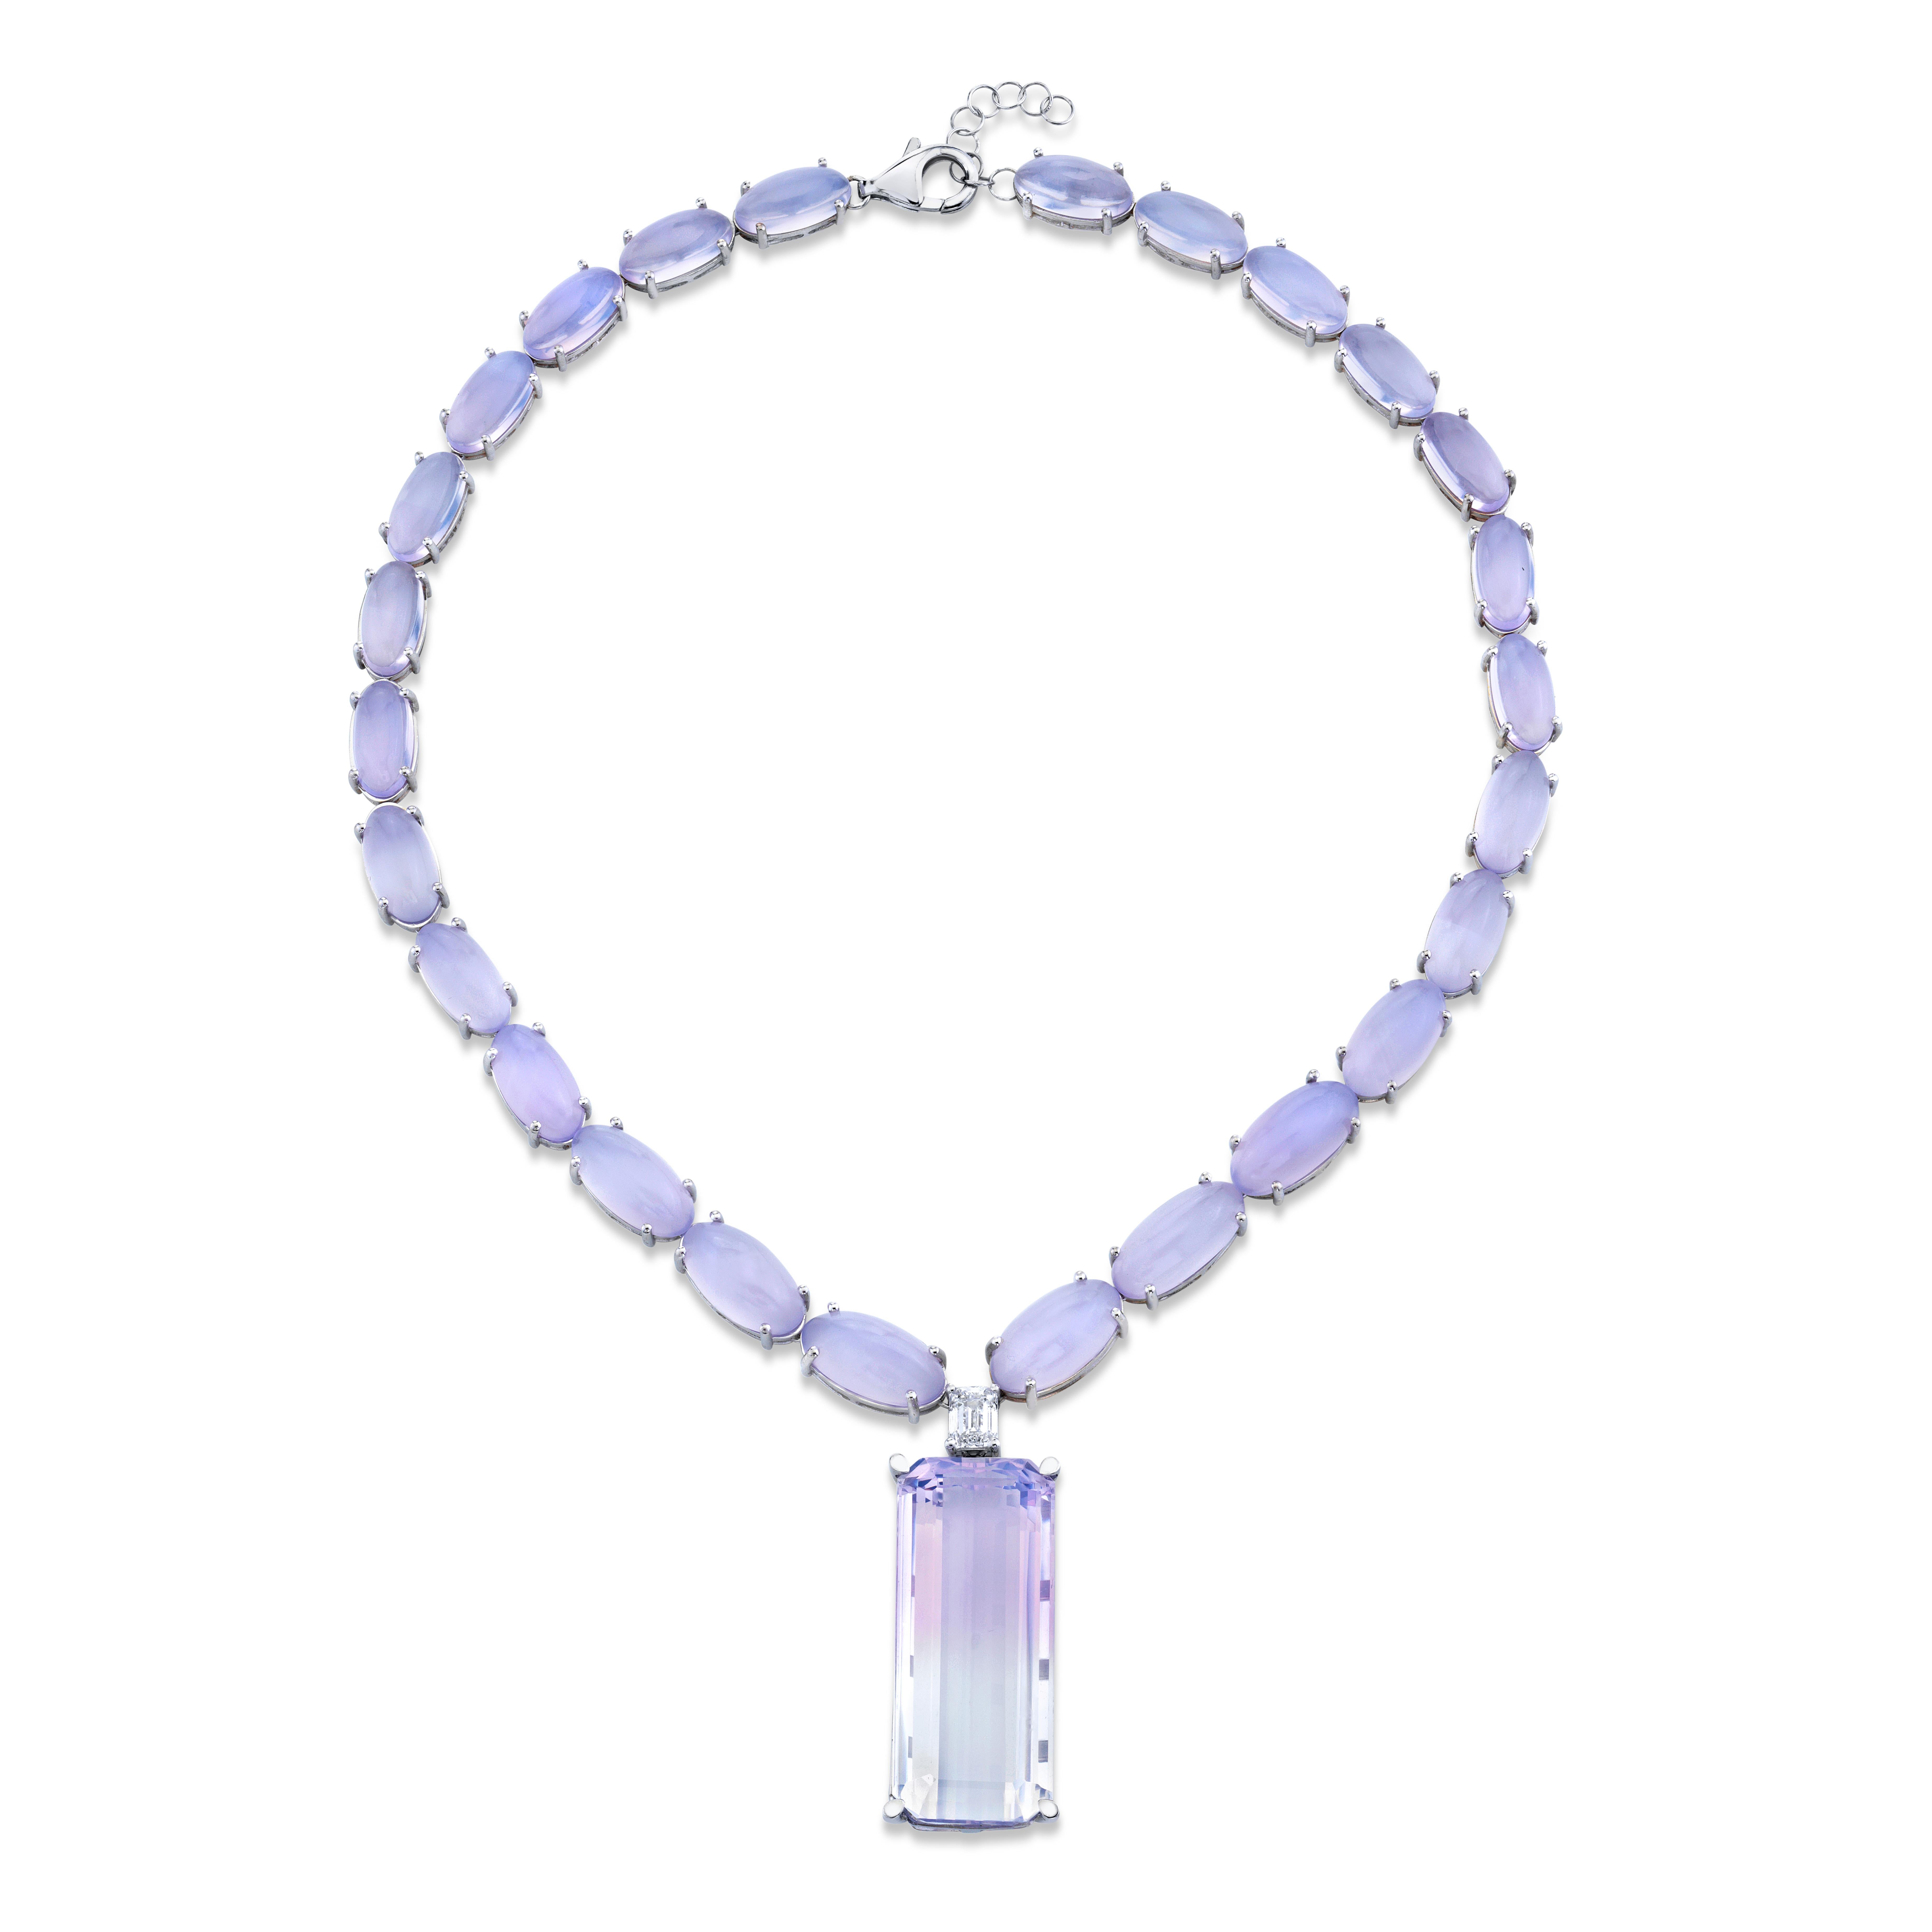 Emerald Cut Lavender Quartz Waterfall Necklace in 18k White Gold For Sale